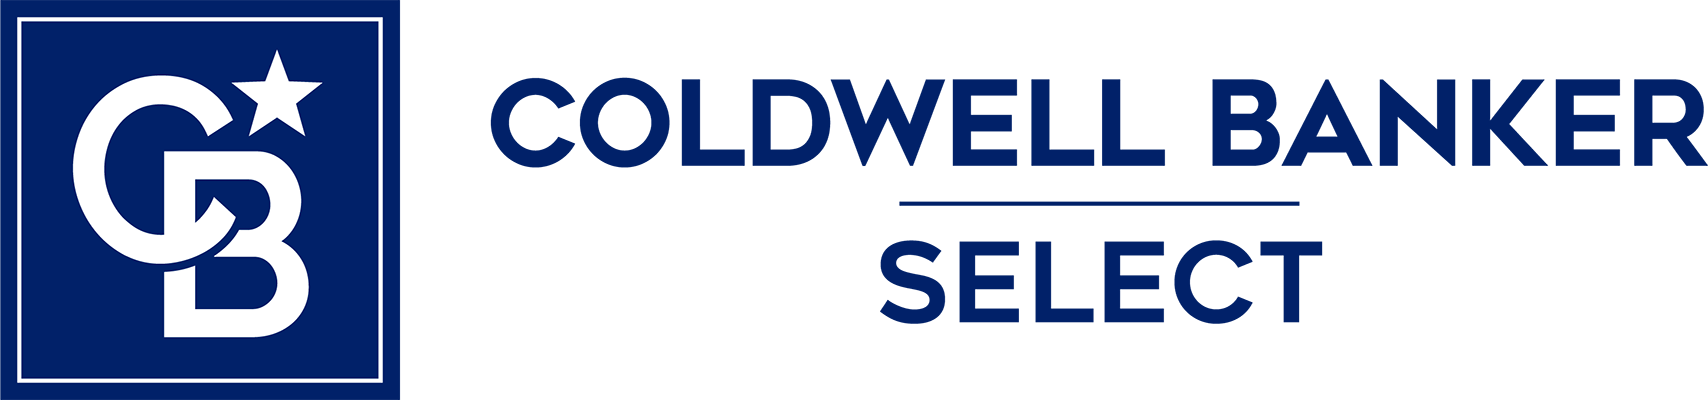 Cindy Cuddy - Coldwell Banker Select Logo